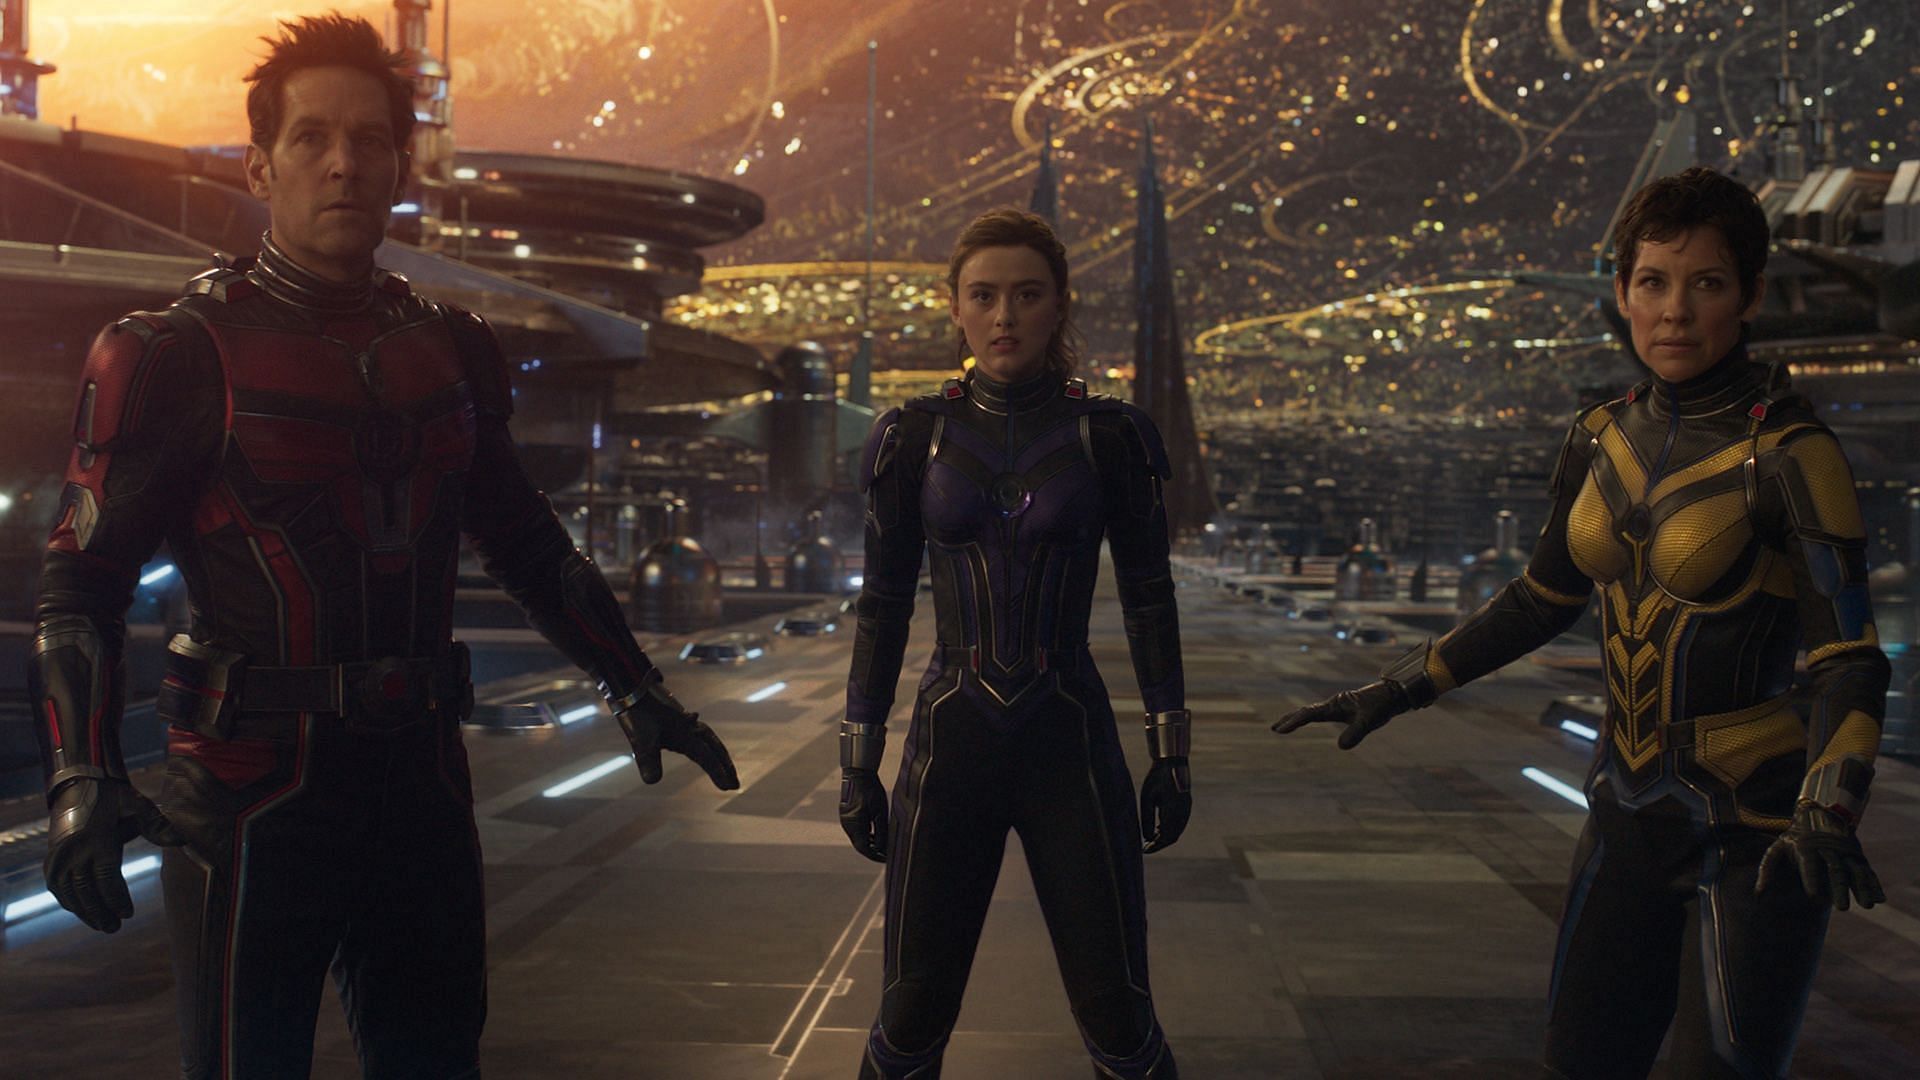 From Left to Right: Ant-Man/Scott Lang, Cassie Lang and Wasp/Hope van Dyne in Ant-Man and The Wasp: Quantumania (Image Credit: Marvel Studios)